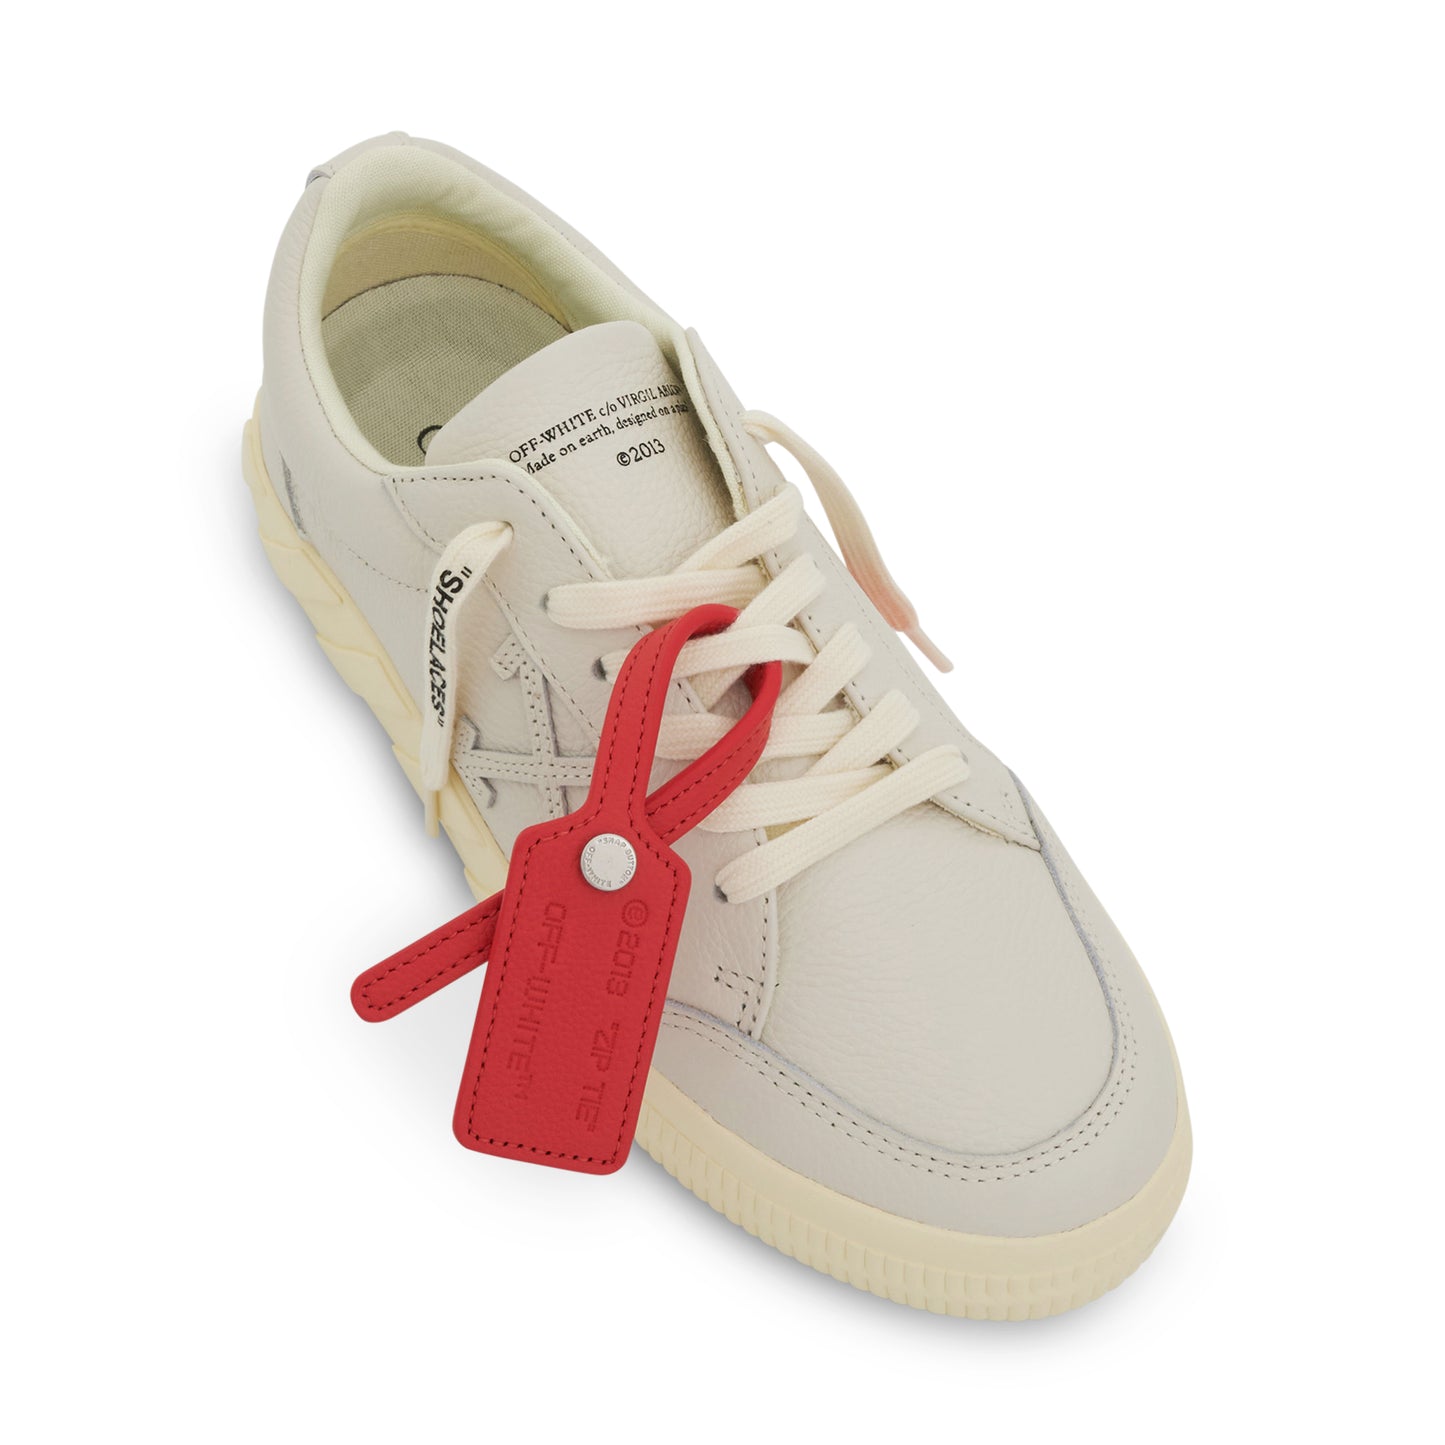 Low Vulcanized Calf Leather Sneakers in White